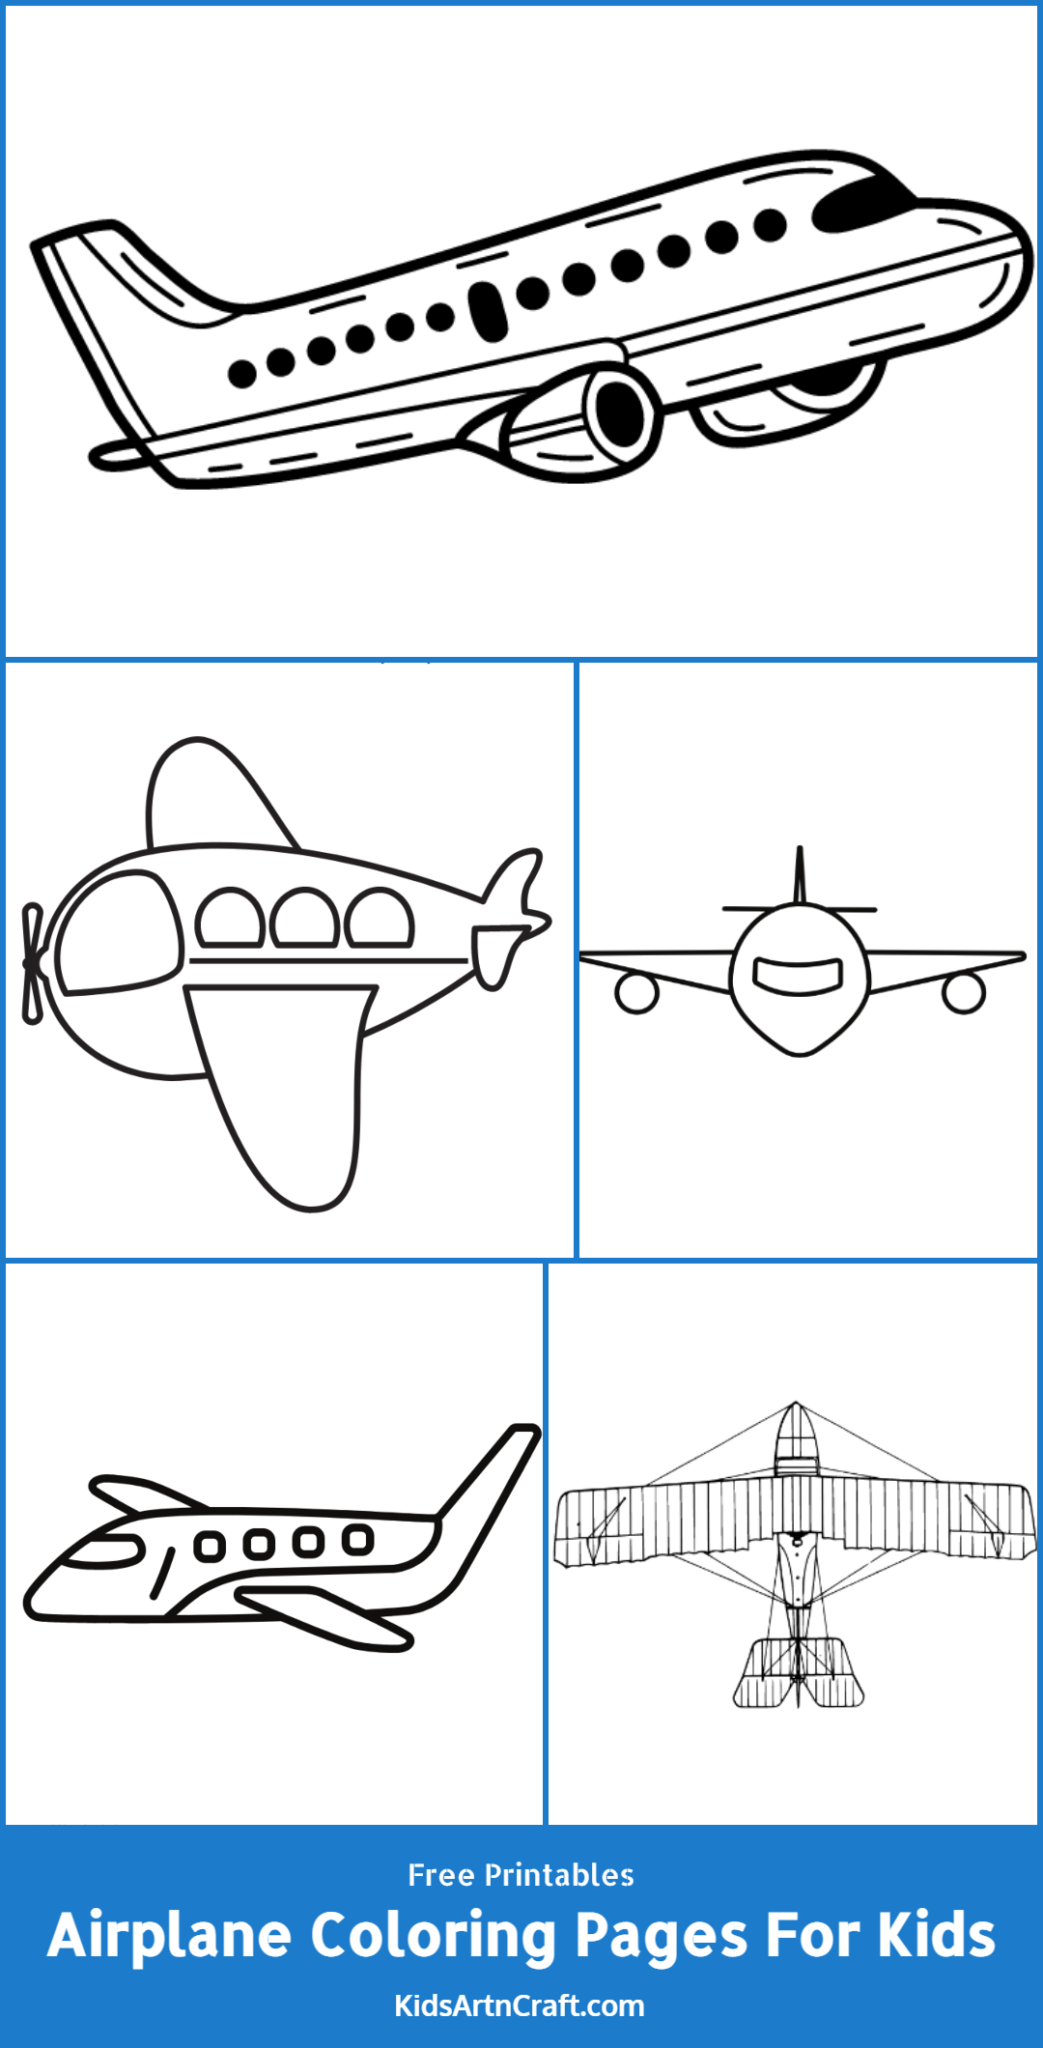 Airplanes Coloring Pages For Kids – Free Printables - Kids Art & Craft